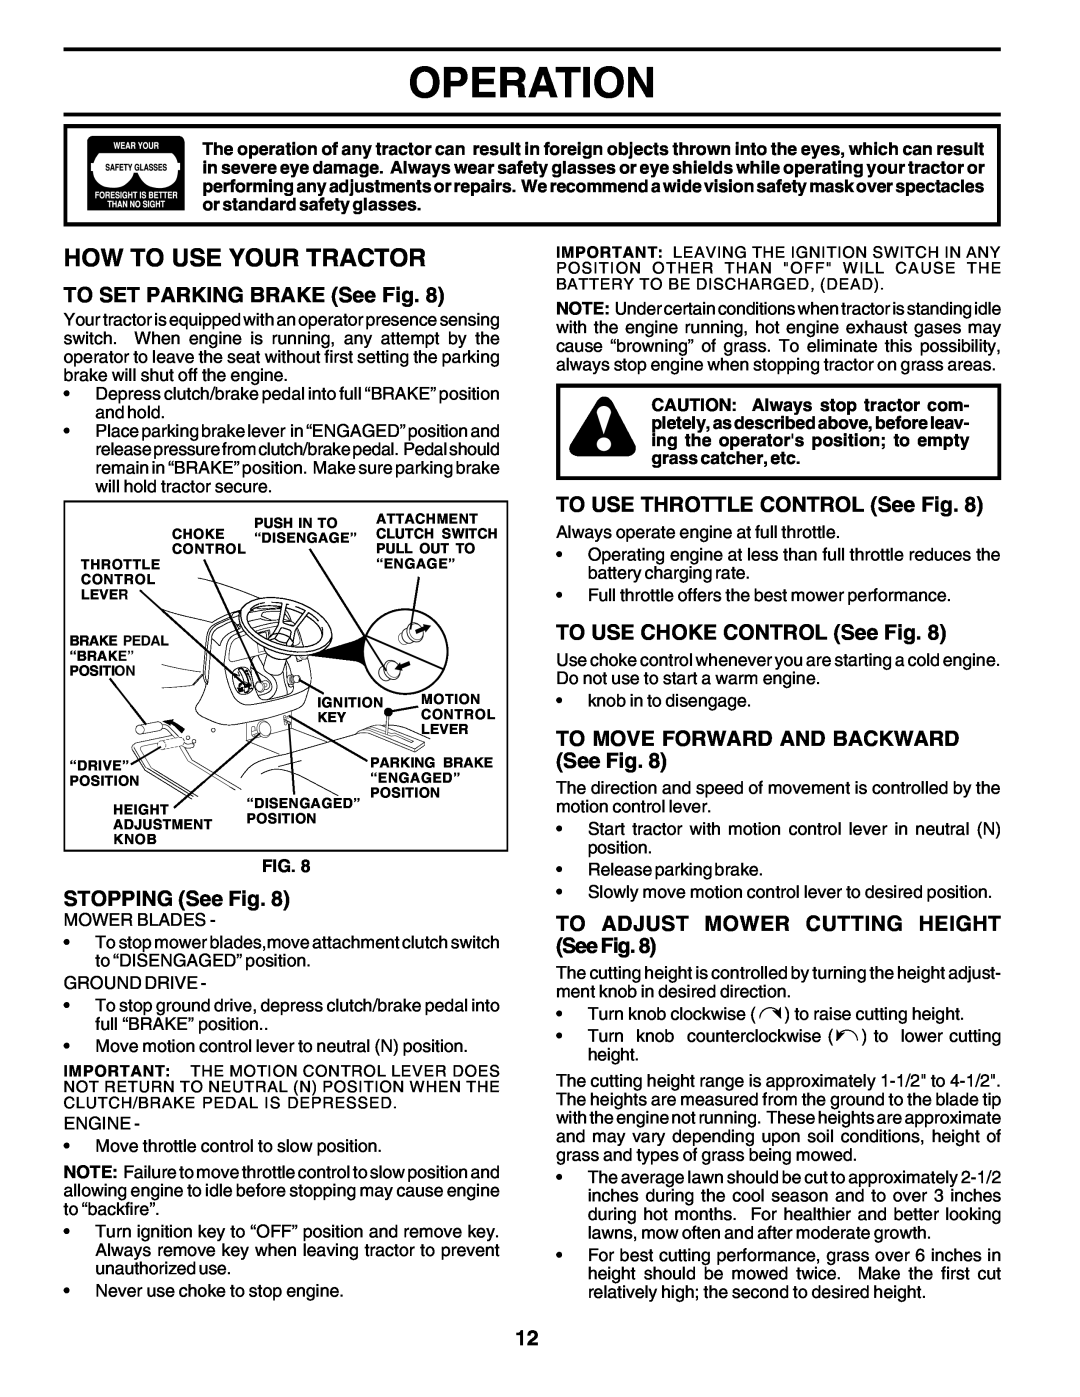 Poulan PRGT22H50C owner manual How To Use Your Tractor, Operation, TO SET PARKING BRAKE See Fig, STOPPING See Fig 